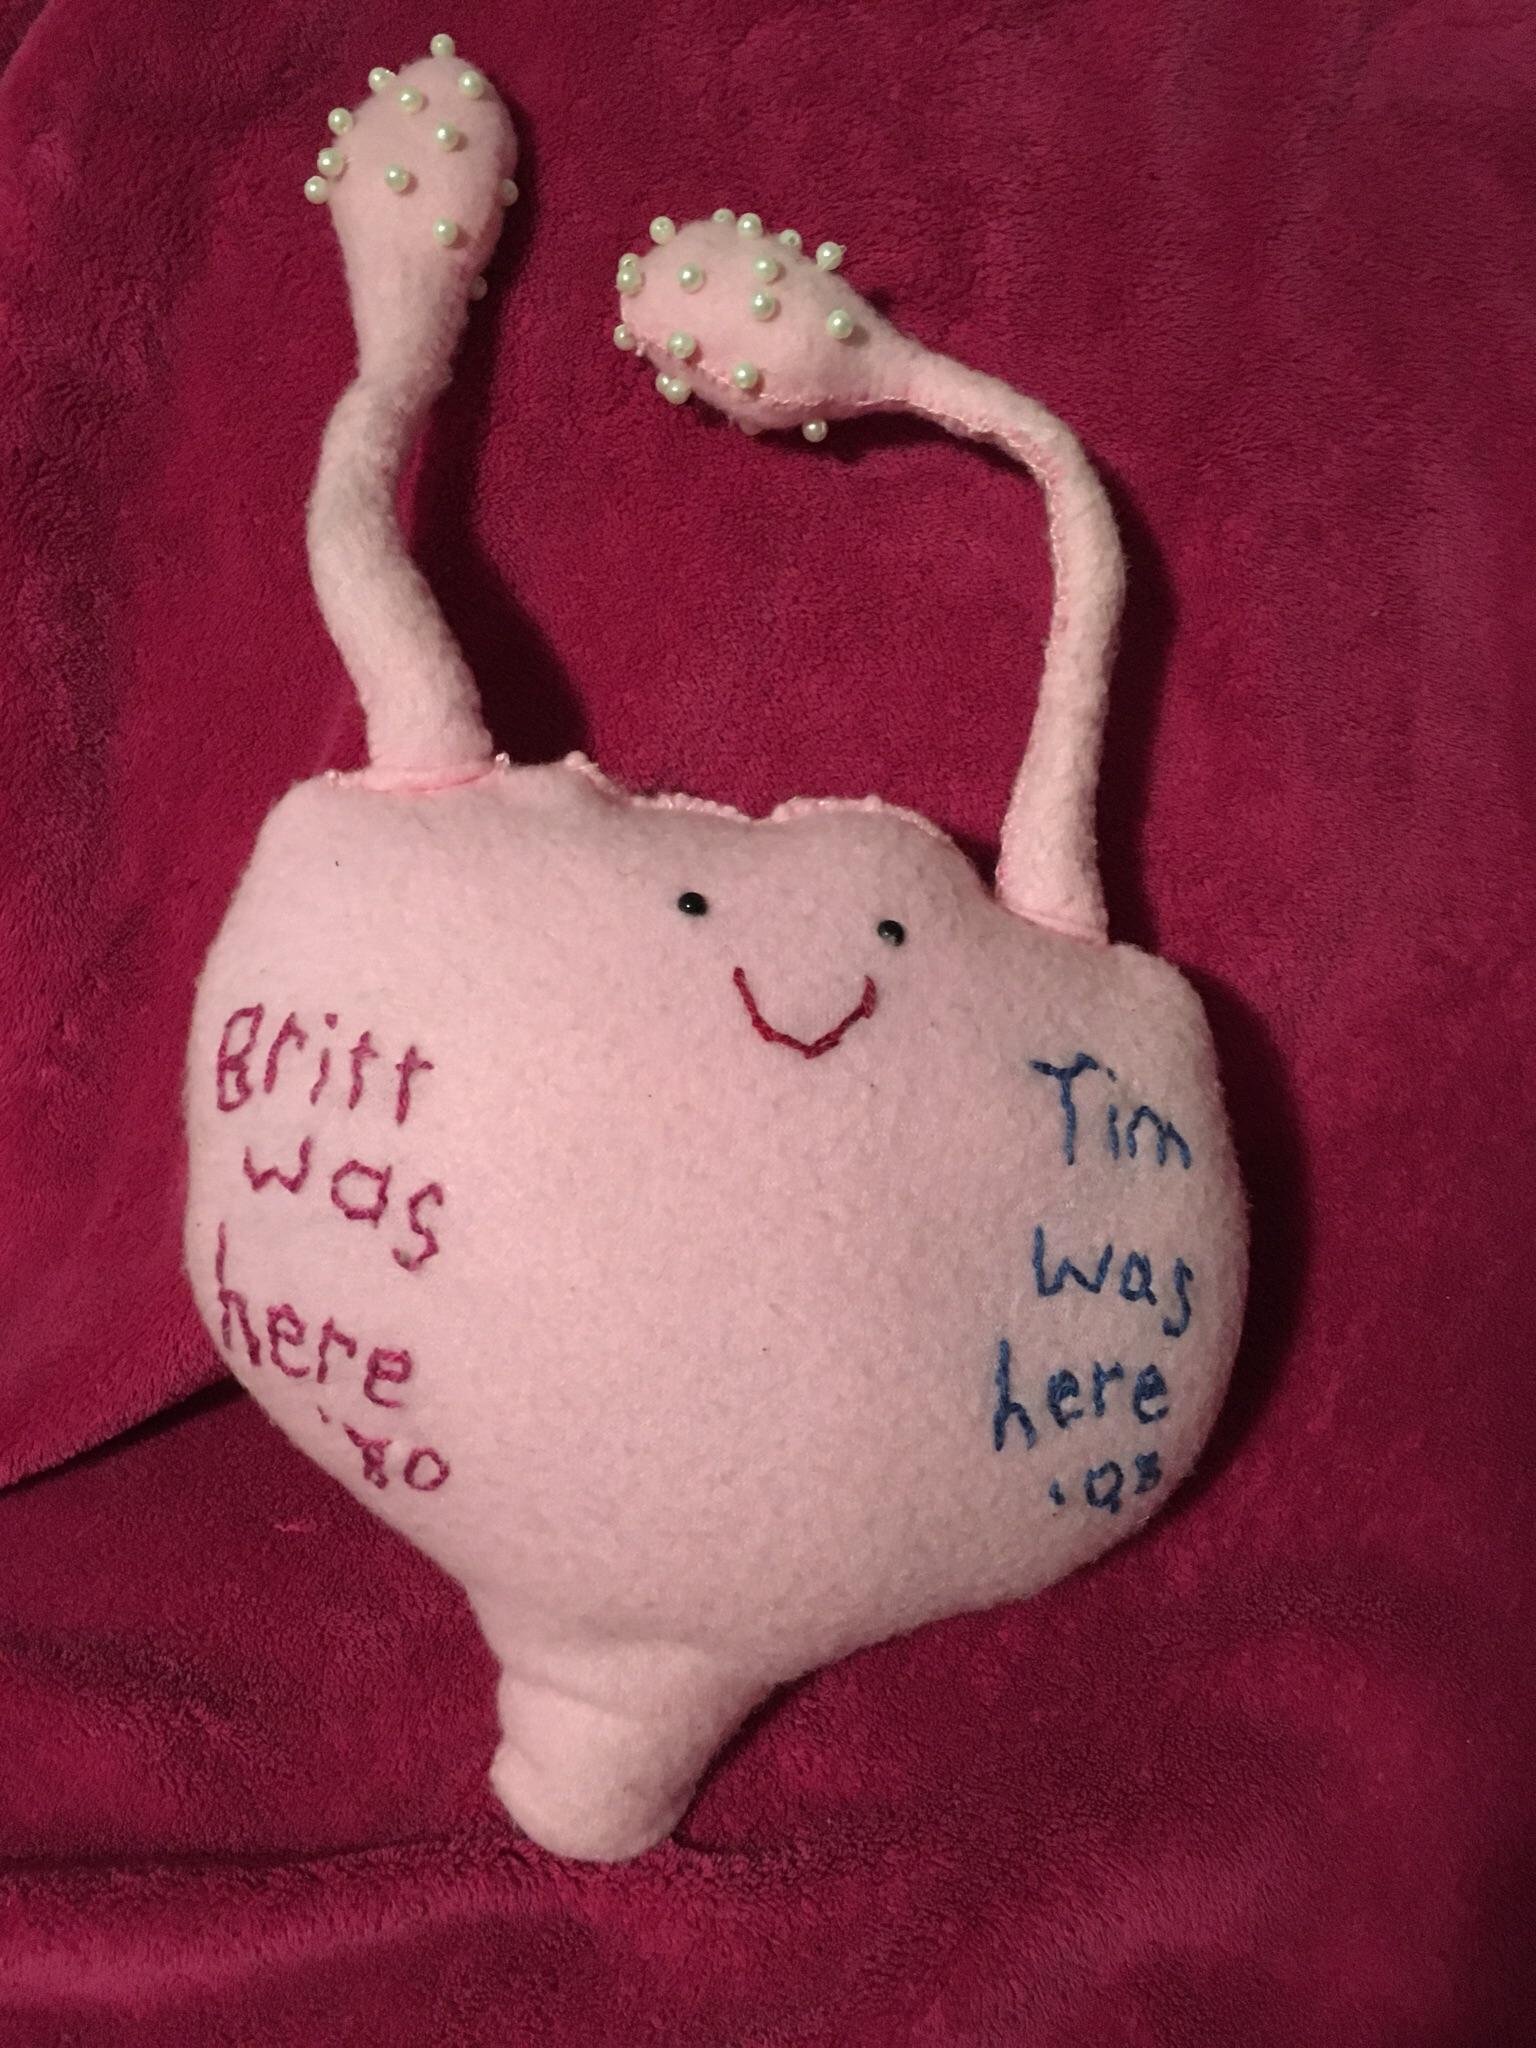 Made for mom after her hysterectomy.